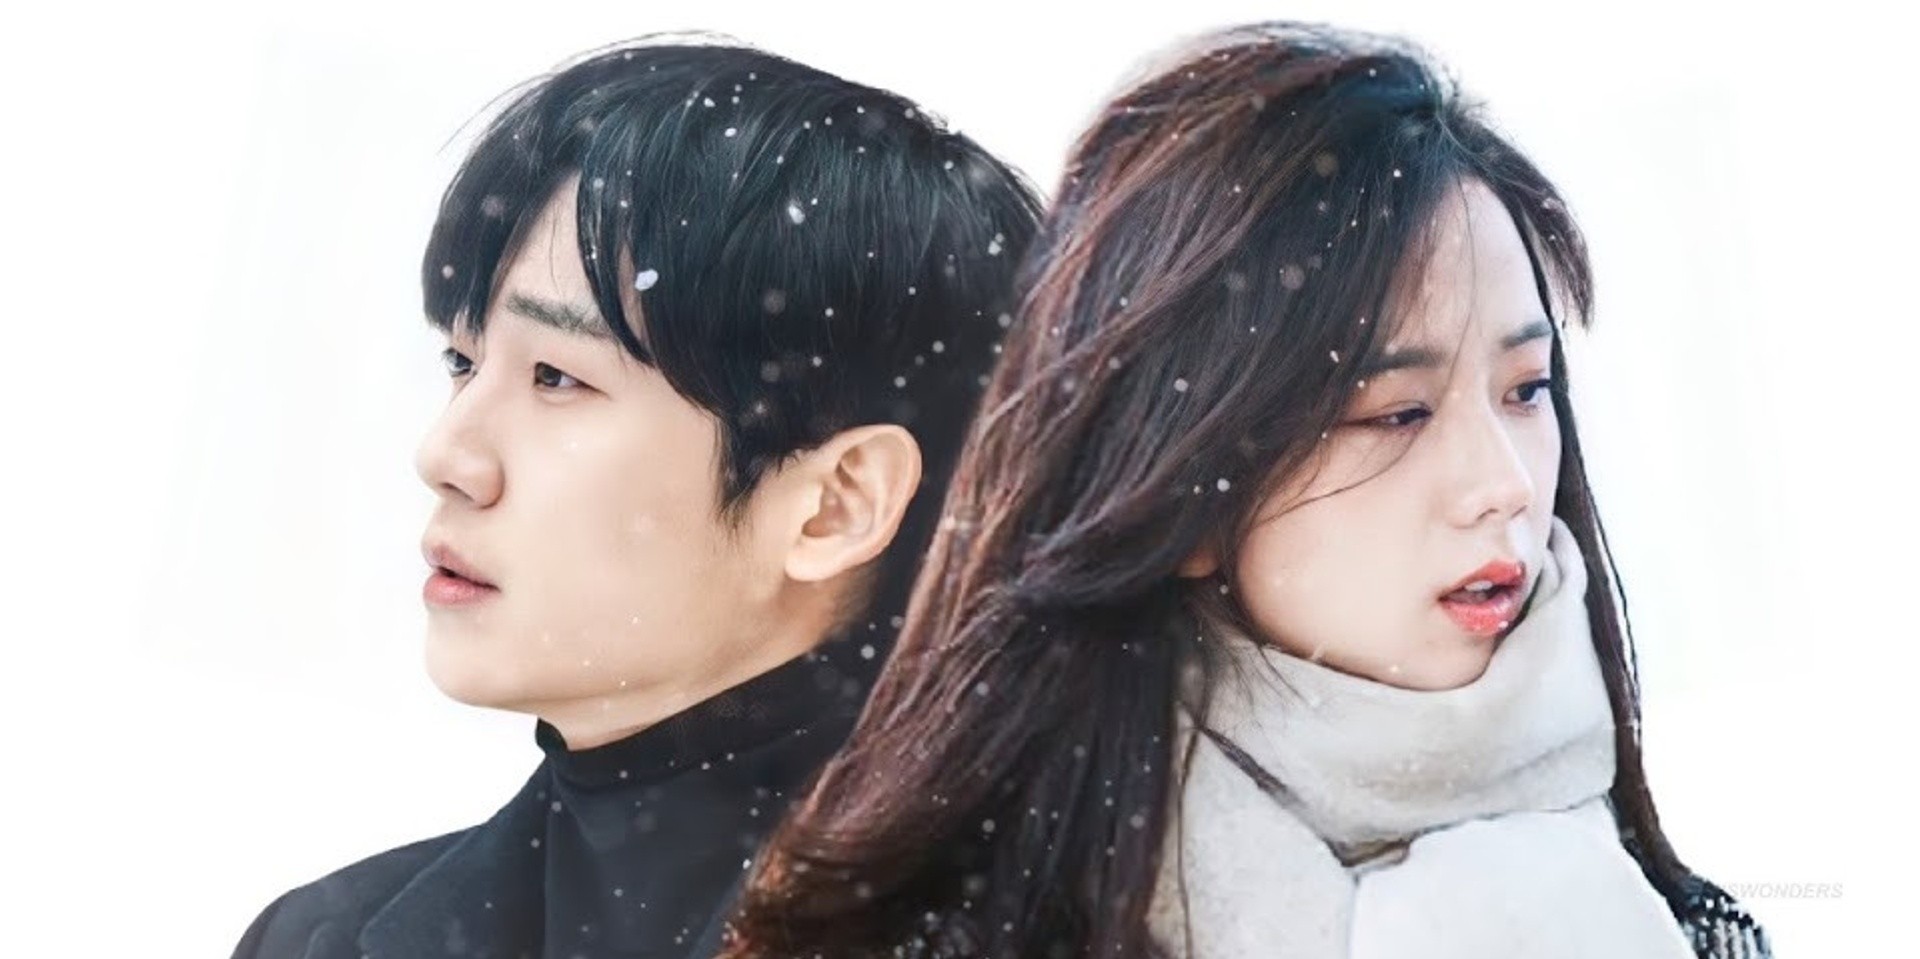 'Snowdrop' starring BLACKPINK's Jisoo and Jung Hae In to premiere this December